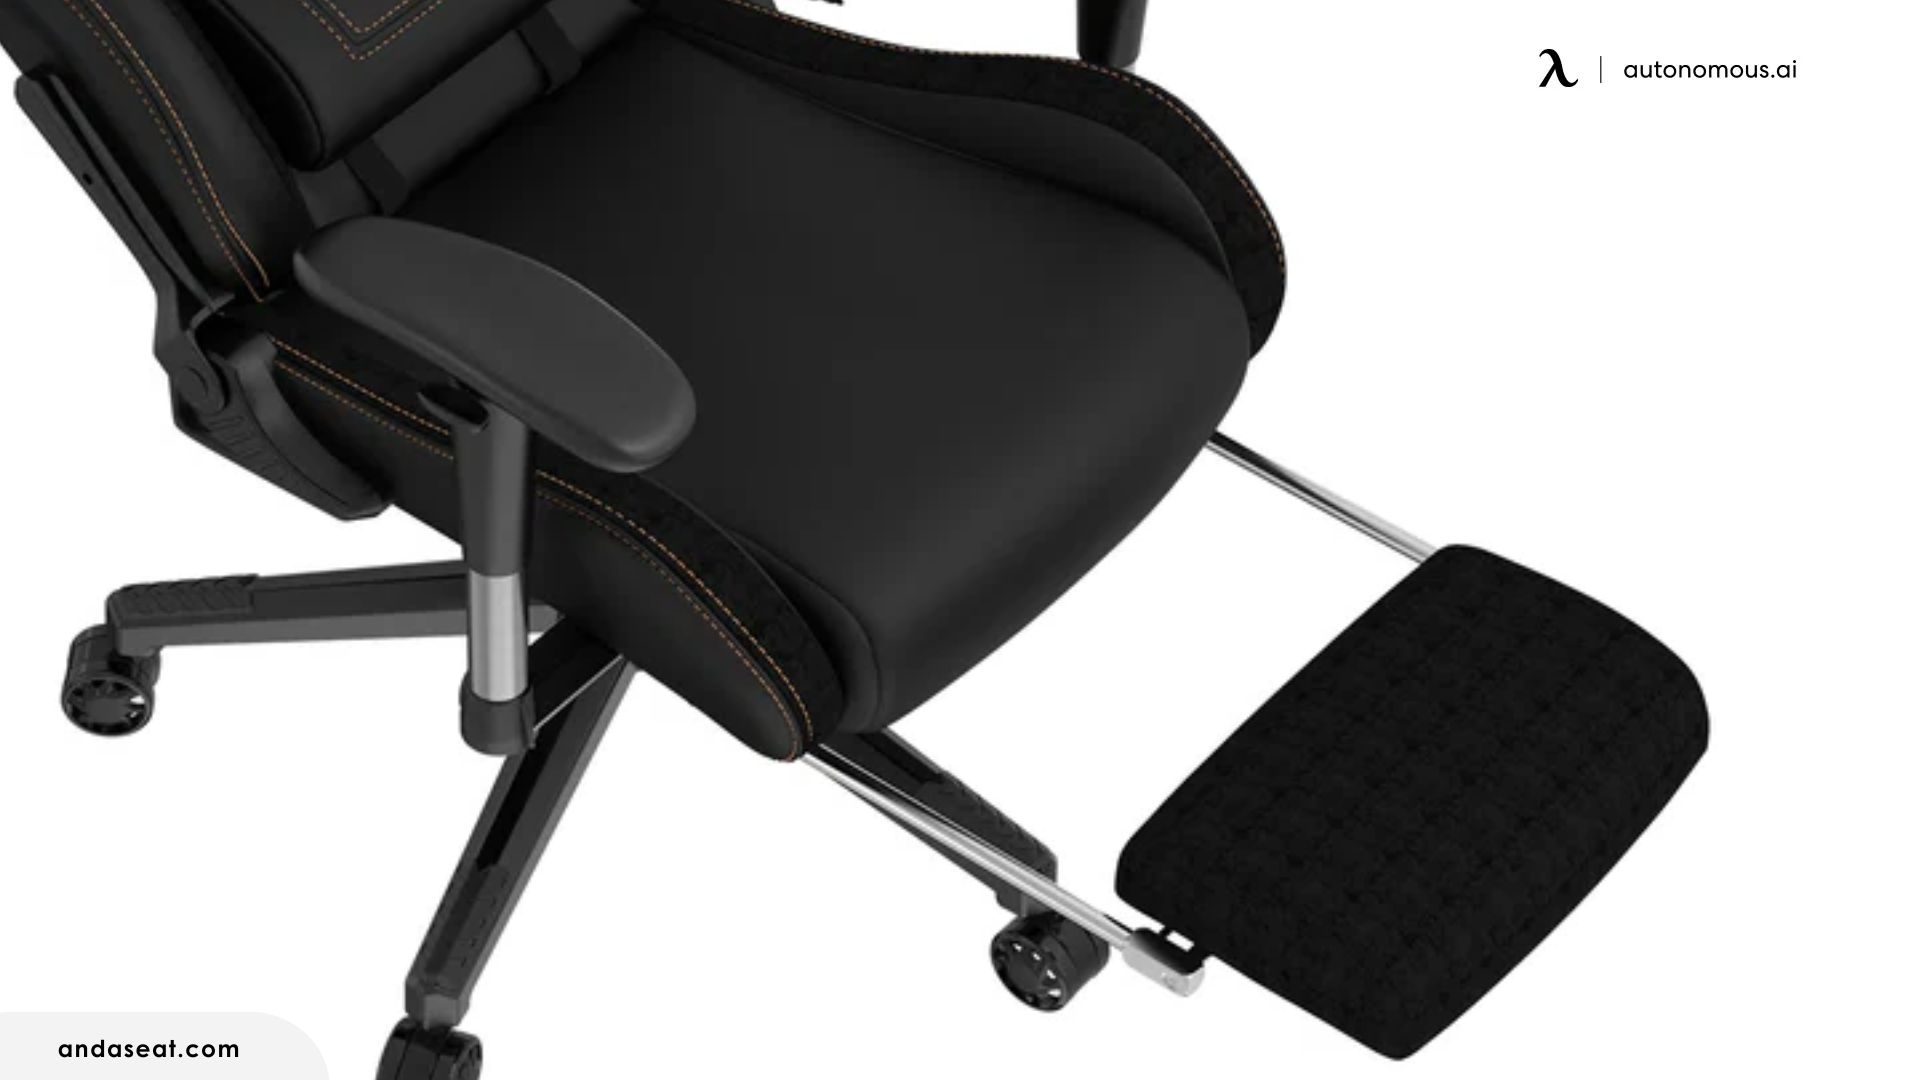 Andaseat Jungle 2 Series Gaming/Office Chair